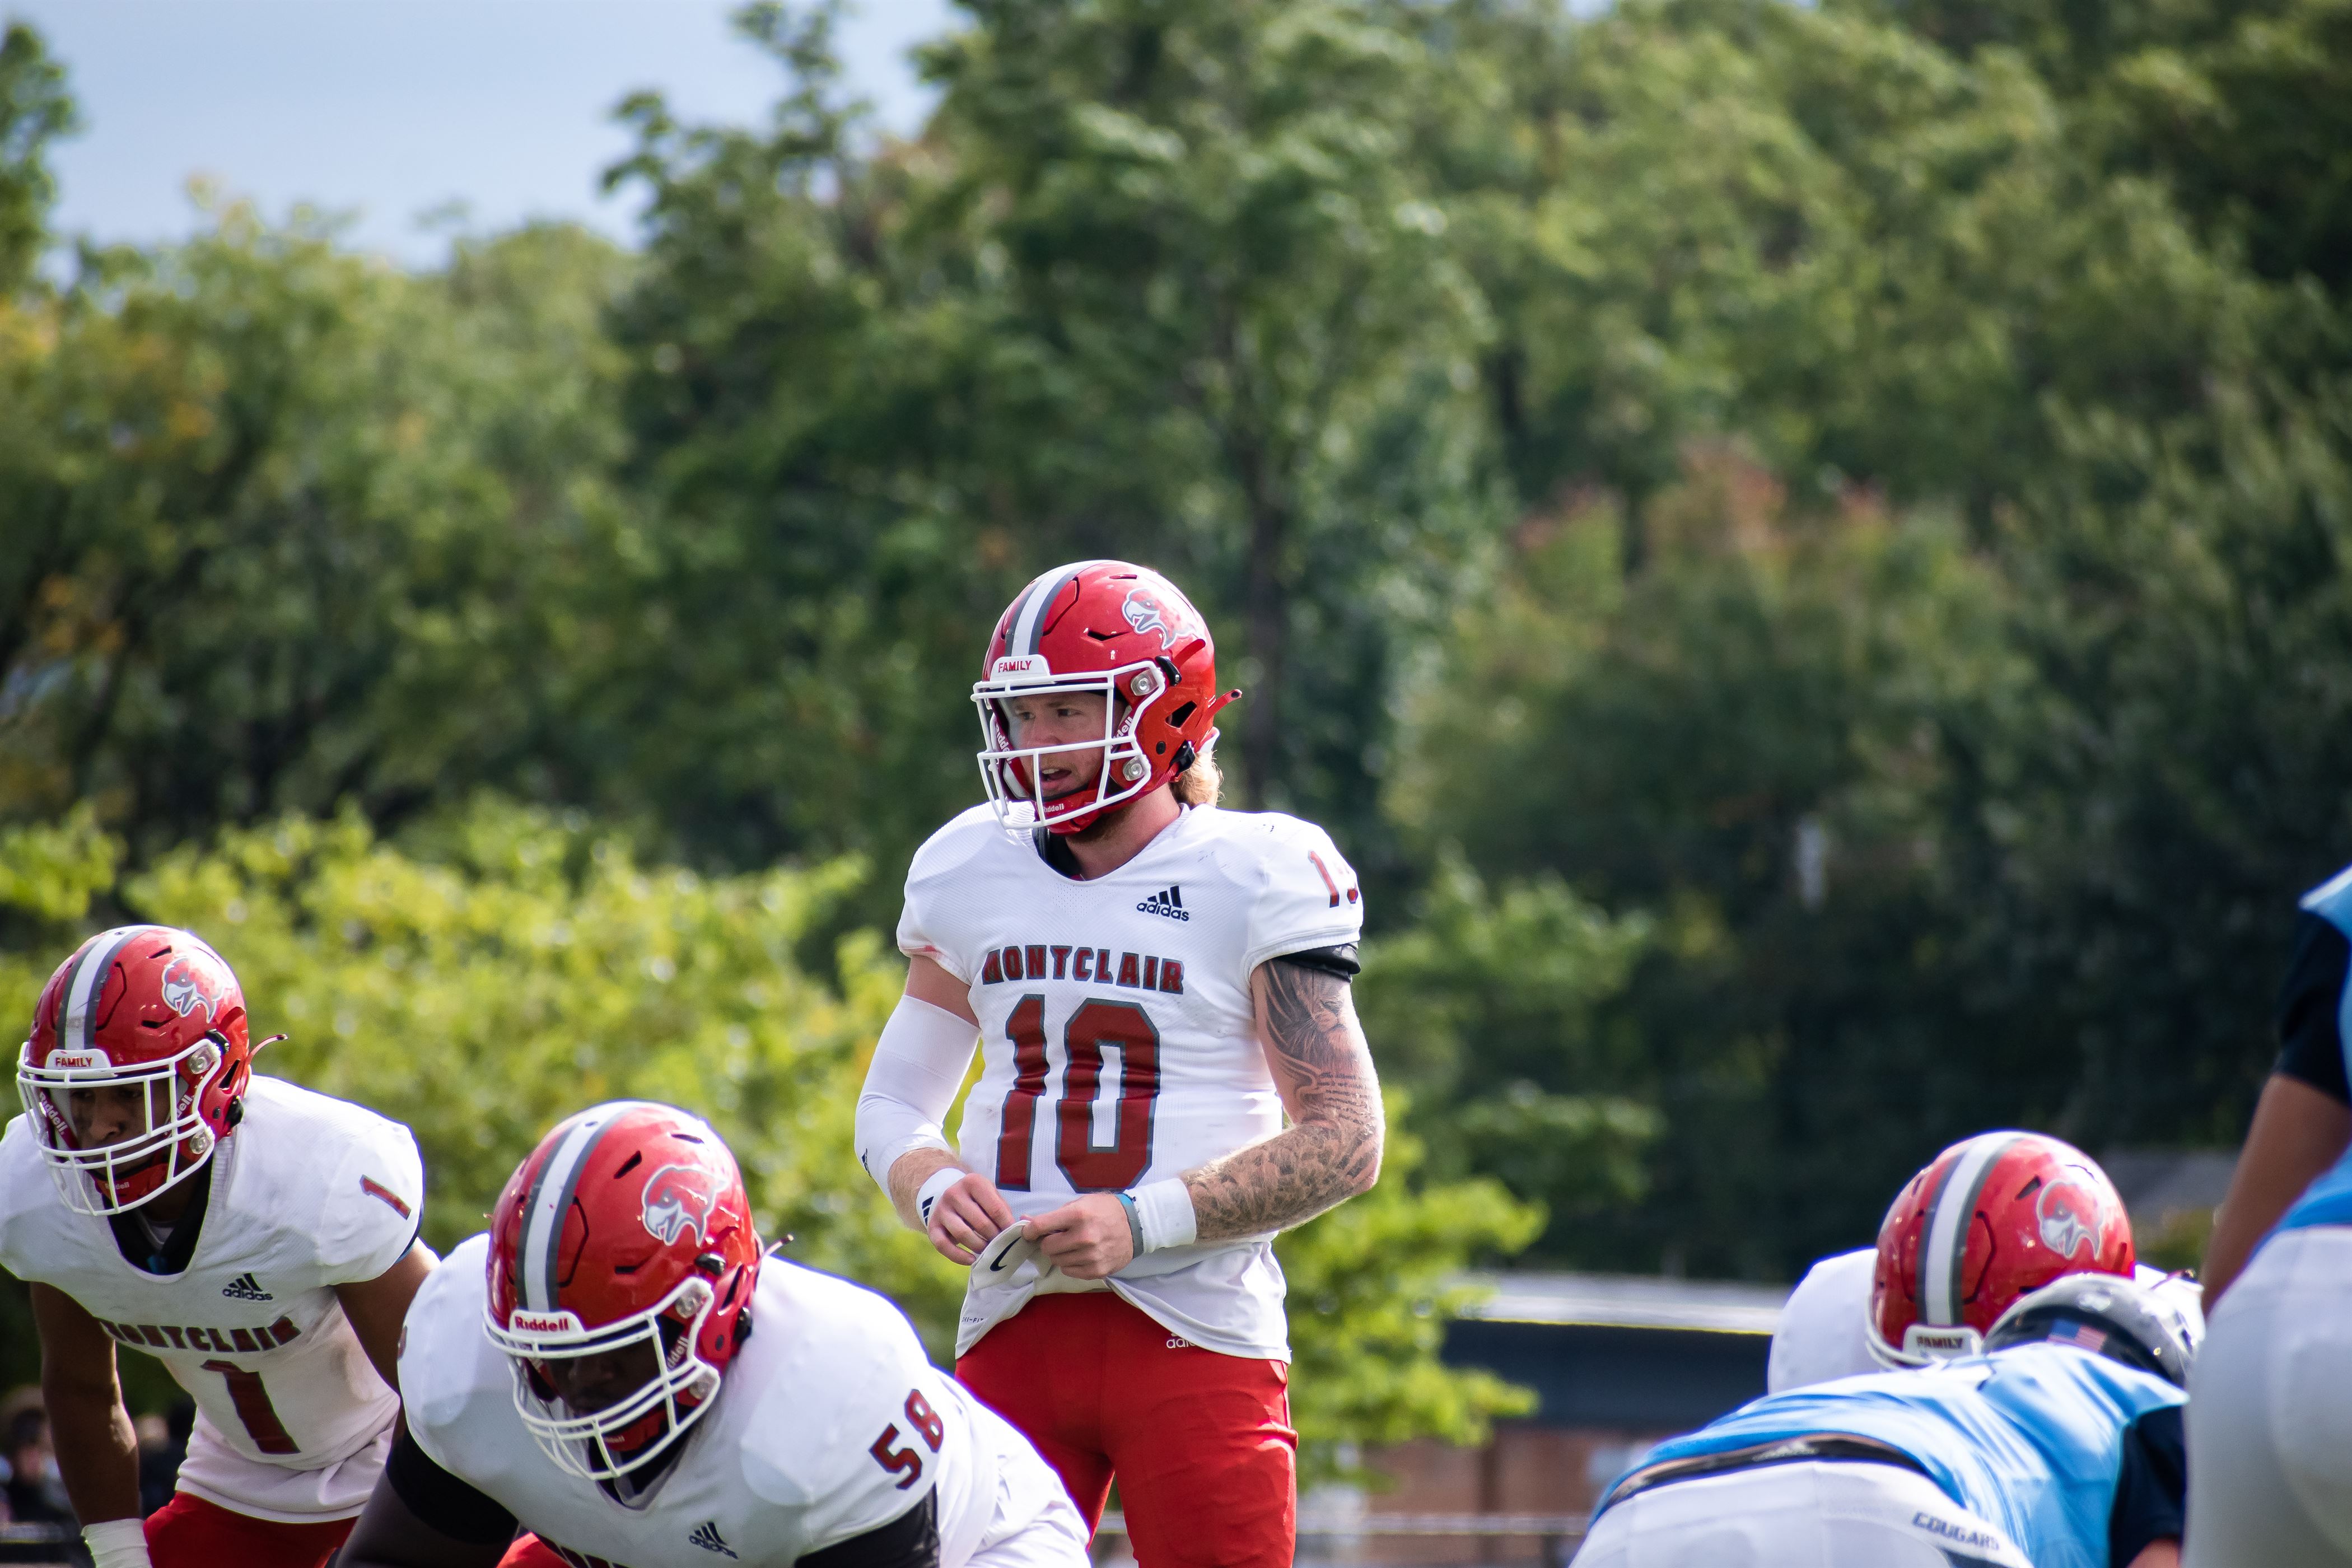 Montclair State rushed for 275 yards and two touchdowns against Kean. Photo courtesy of Danny Deronde